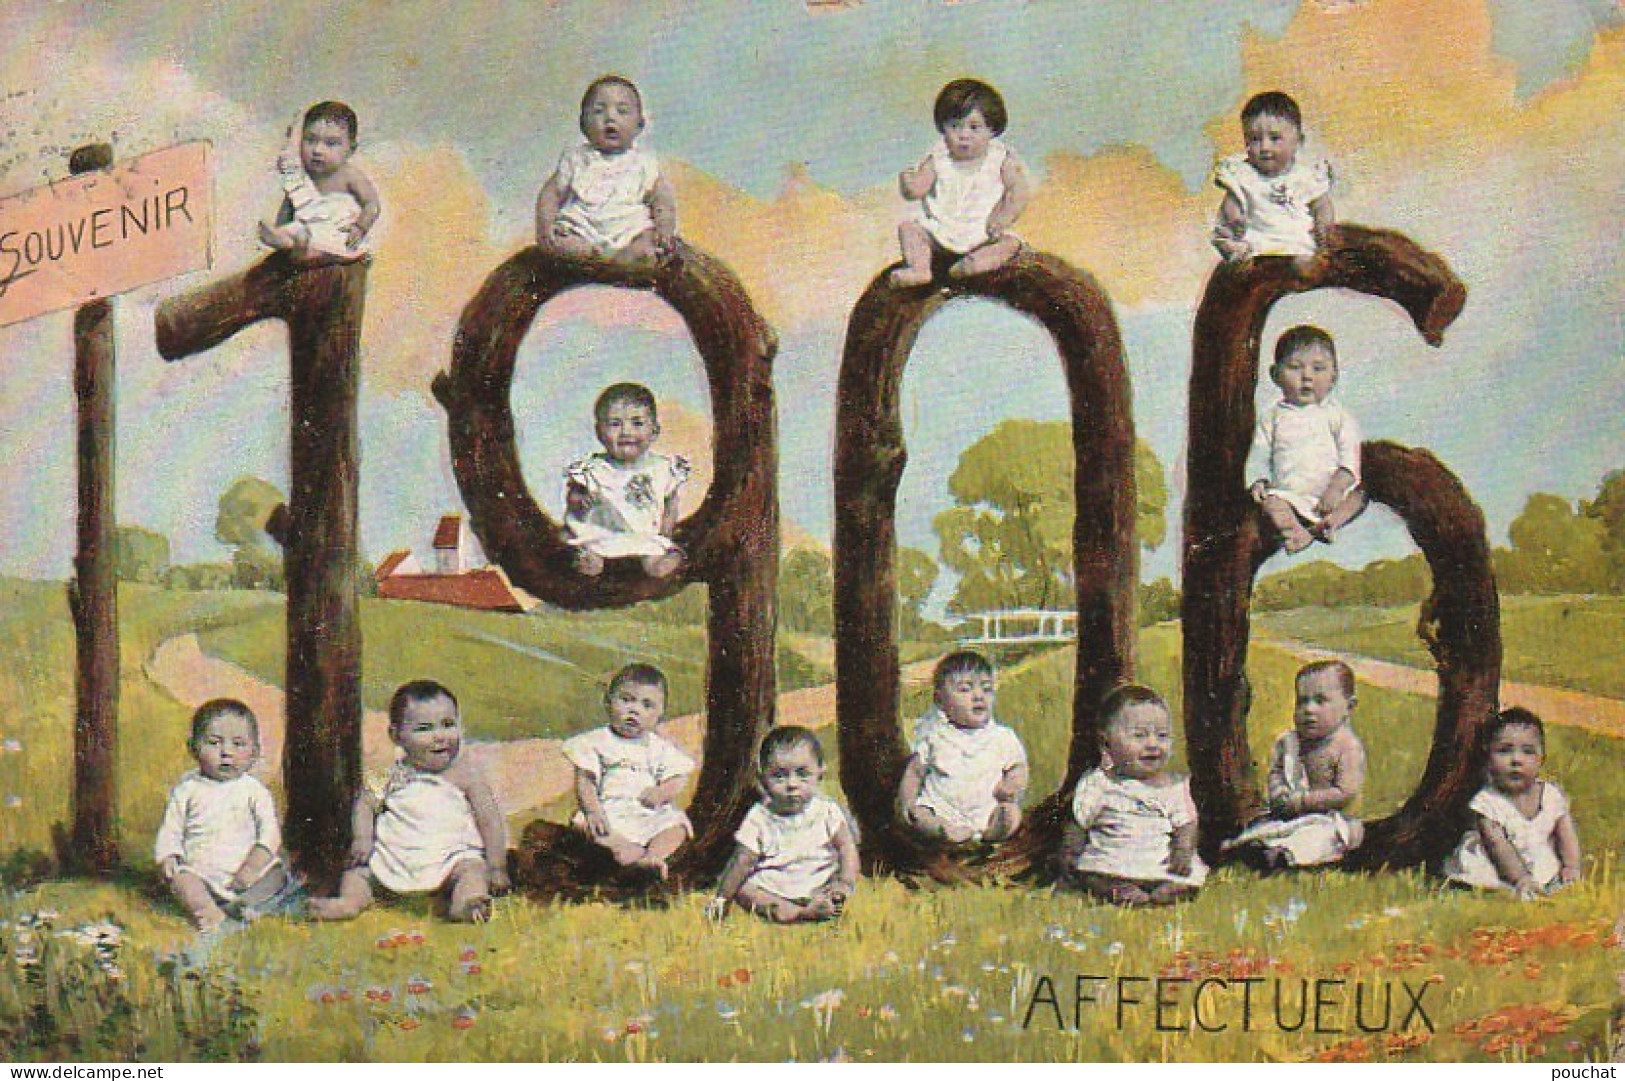 HO Nw (2) ANNEE 1906 - GROUPE DE BEBES , DECOR CHAMPETRE - 2 SCANS - Gruppi Di Bambini & Famiglie